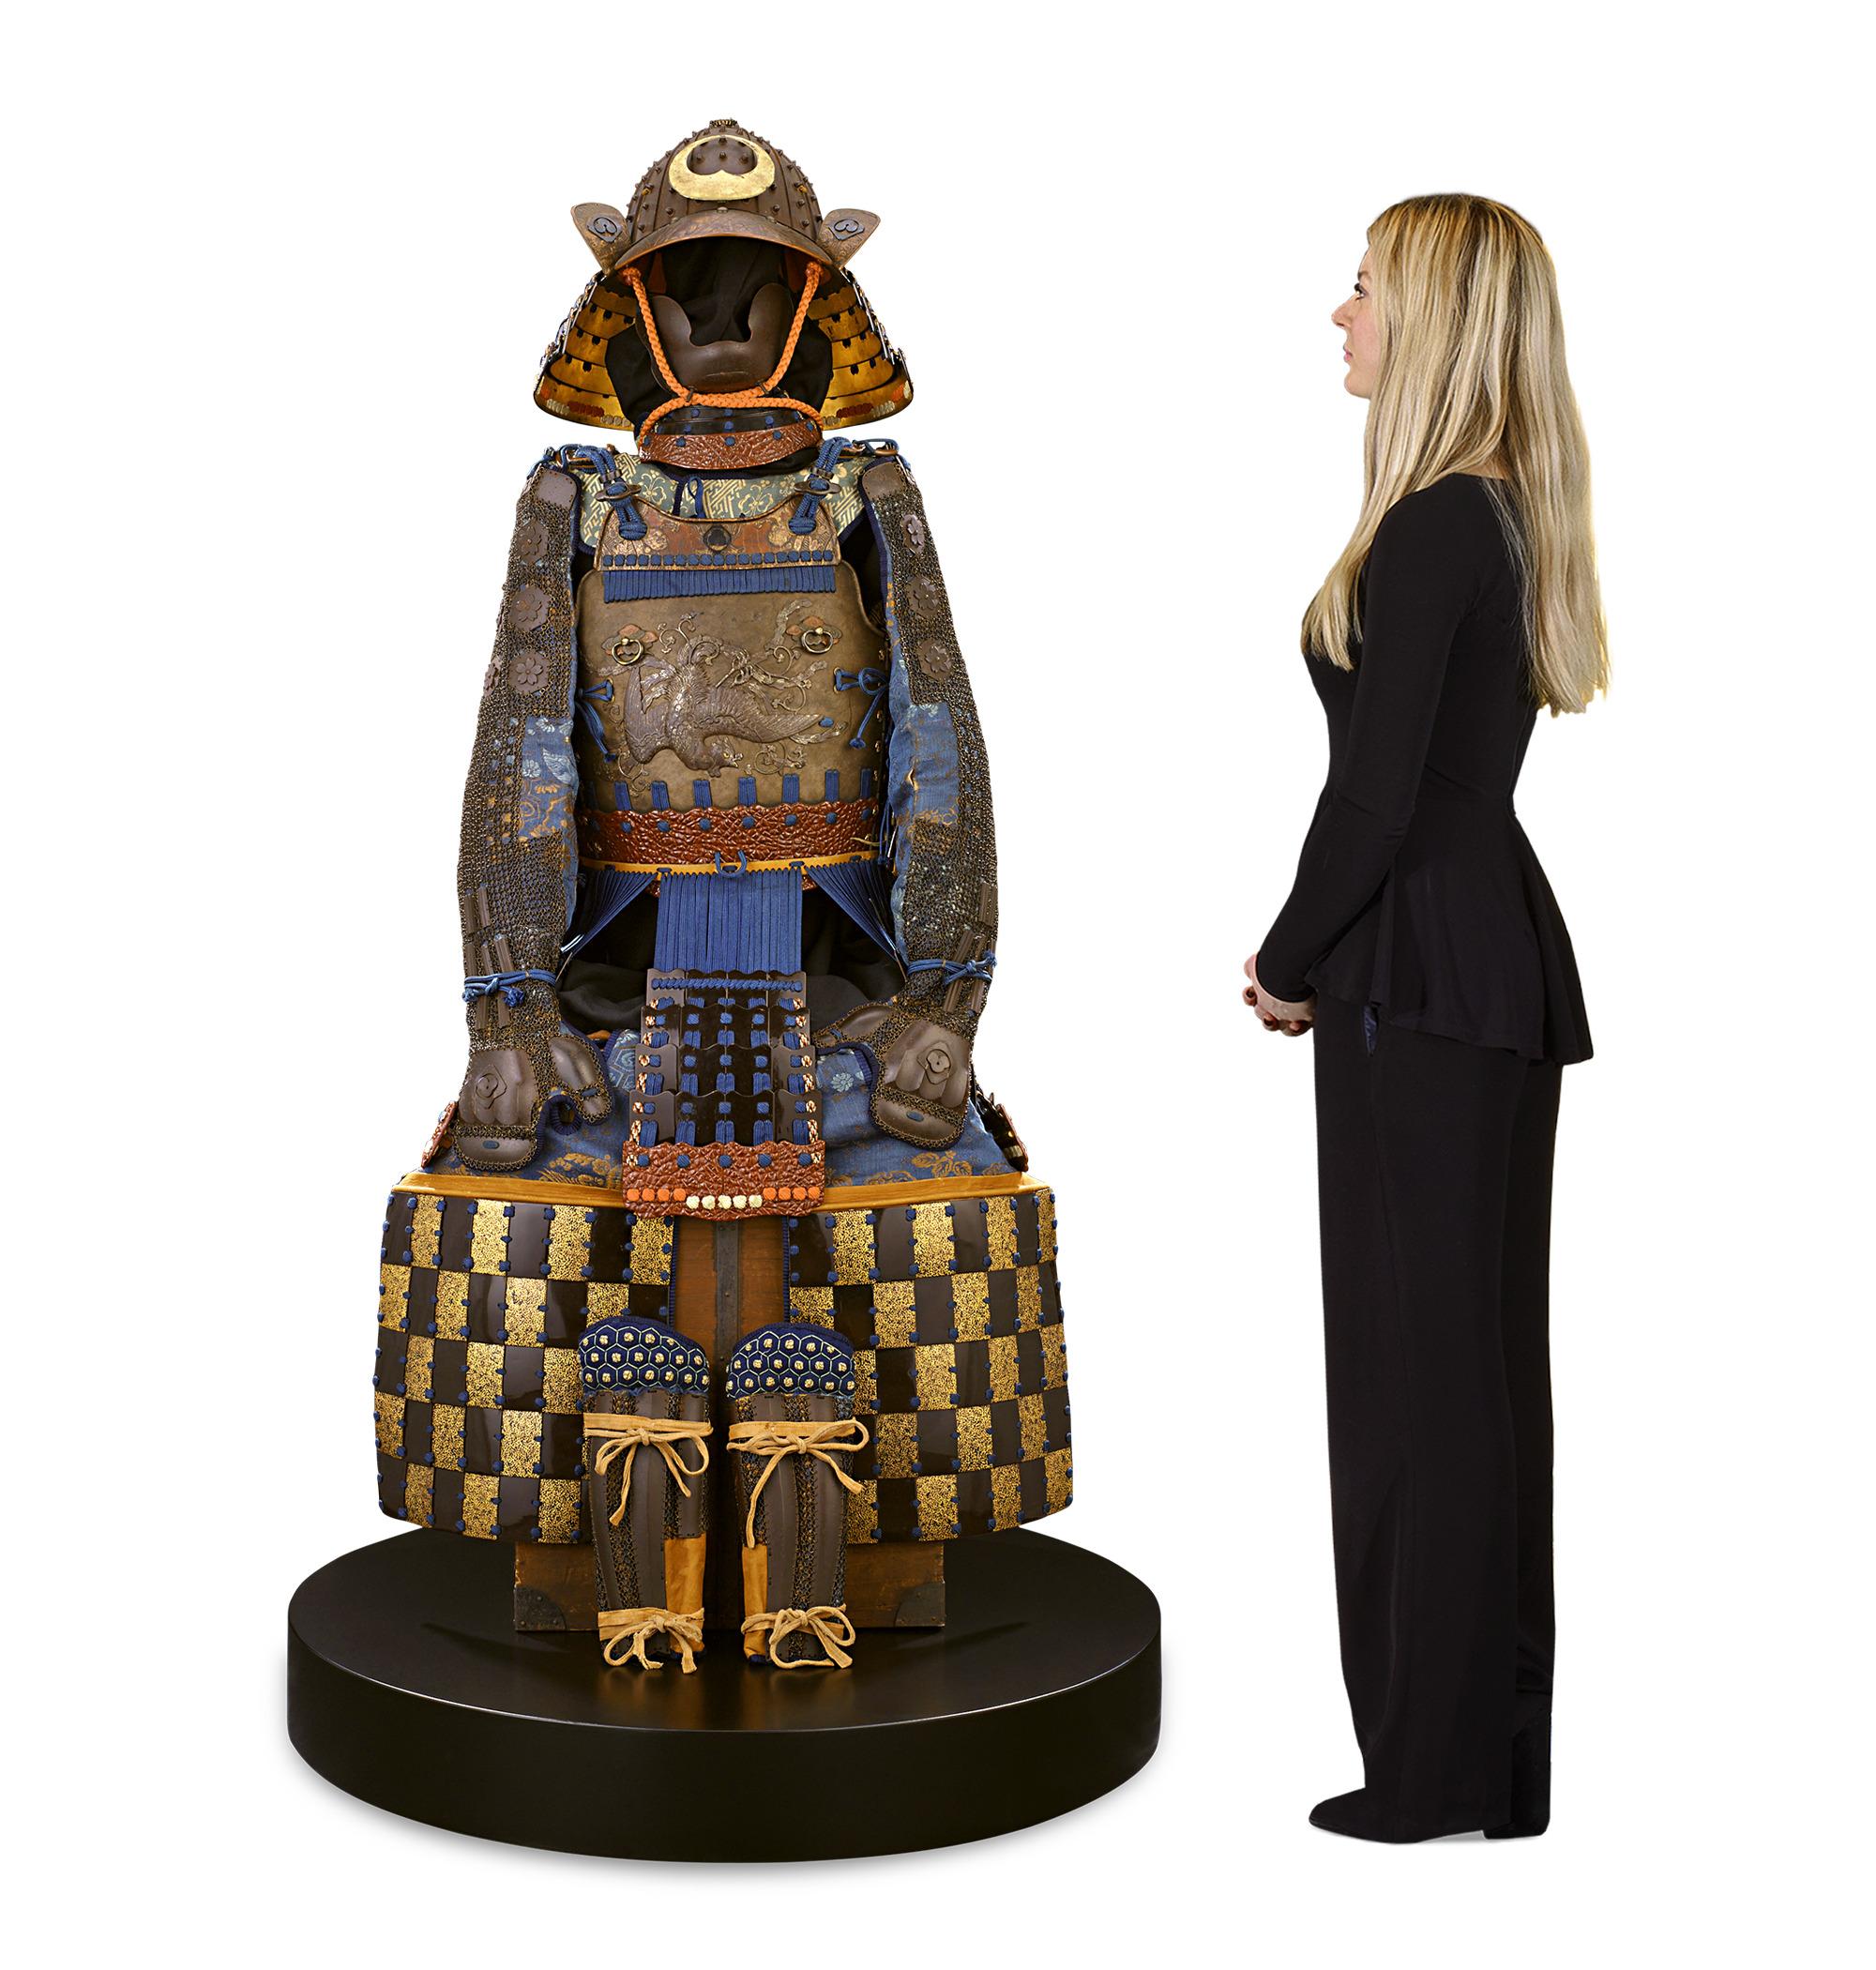 This complete nerikawa Kaga gusoku samurai suit of armor dating to the 18th century represents a stunning fusion of functional design and intricate artistry. Crafted exclusively for the esteemed samurai warriors, the very finest armors employed